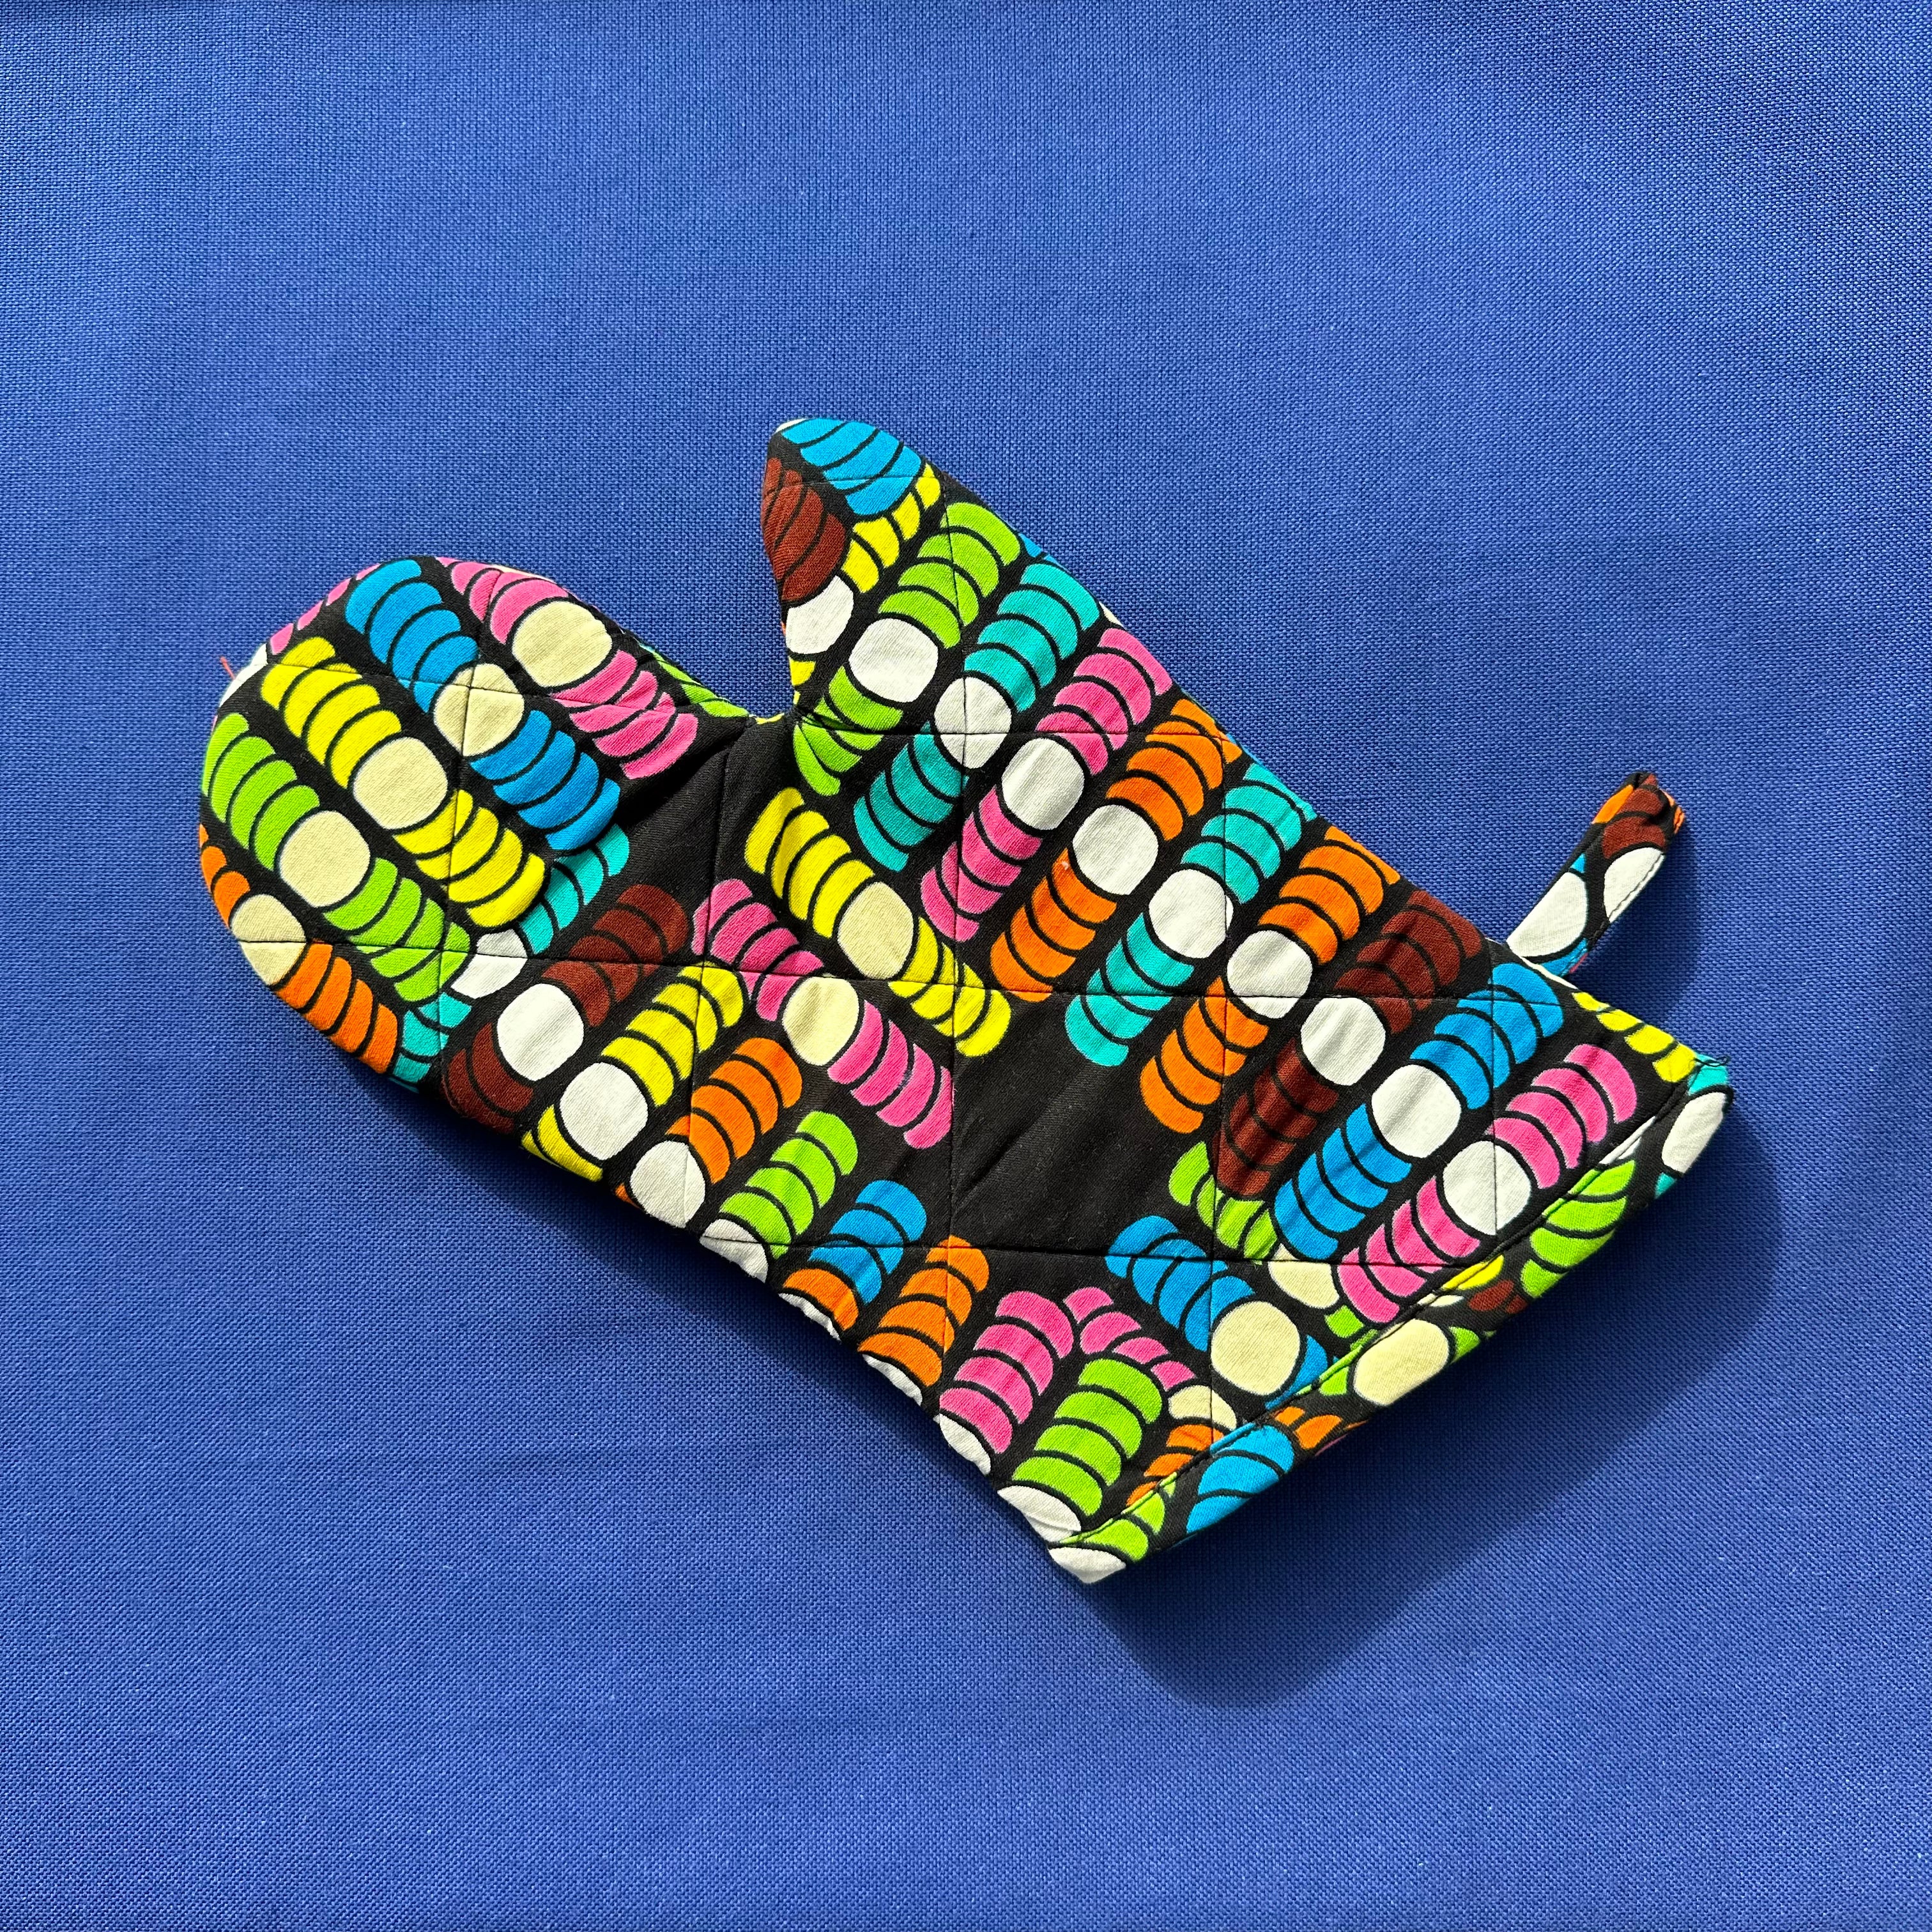 Display of rainbow dotted oven mitt